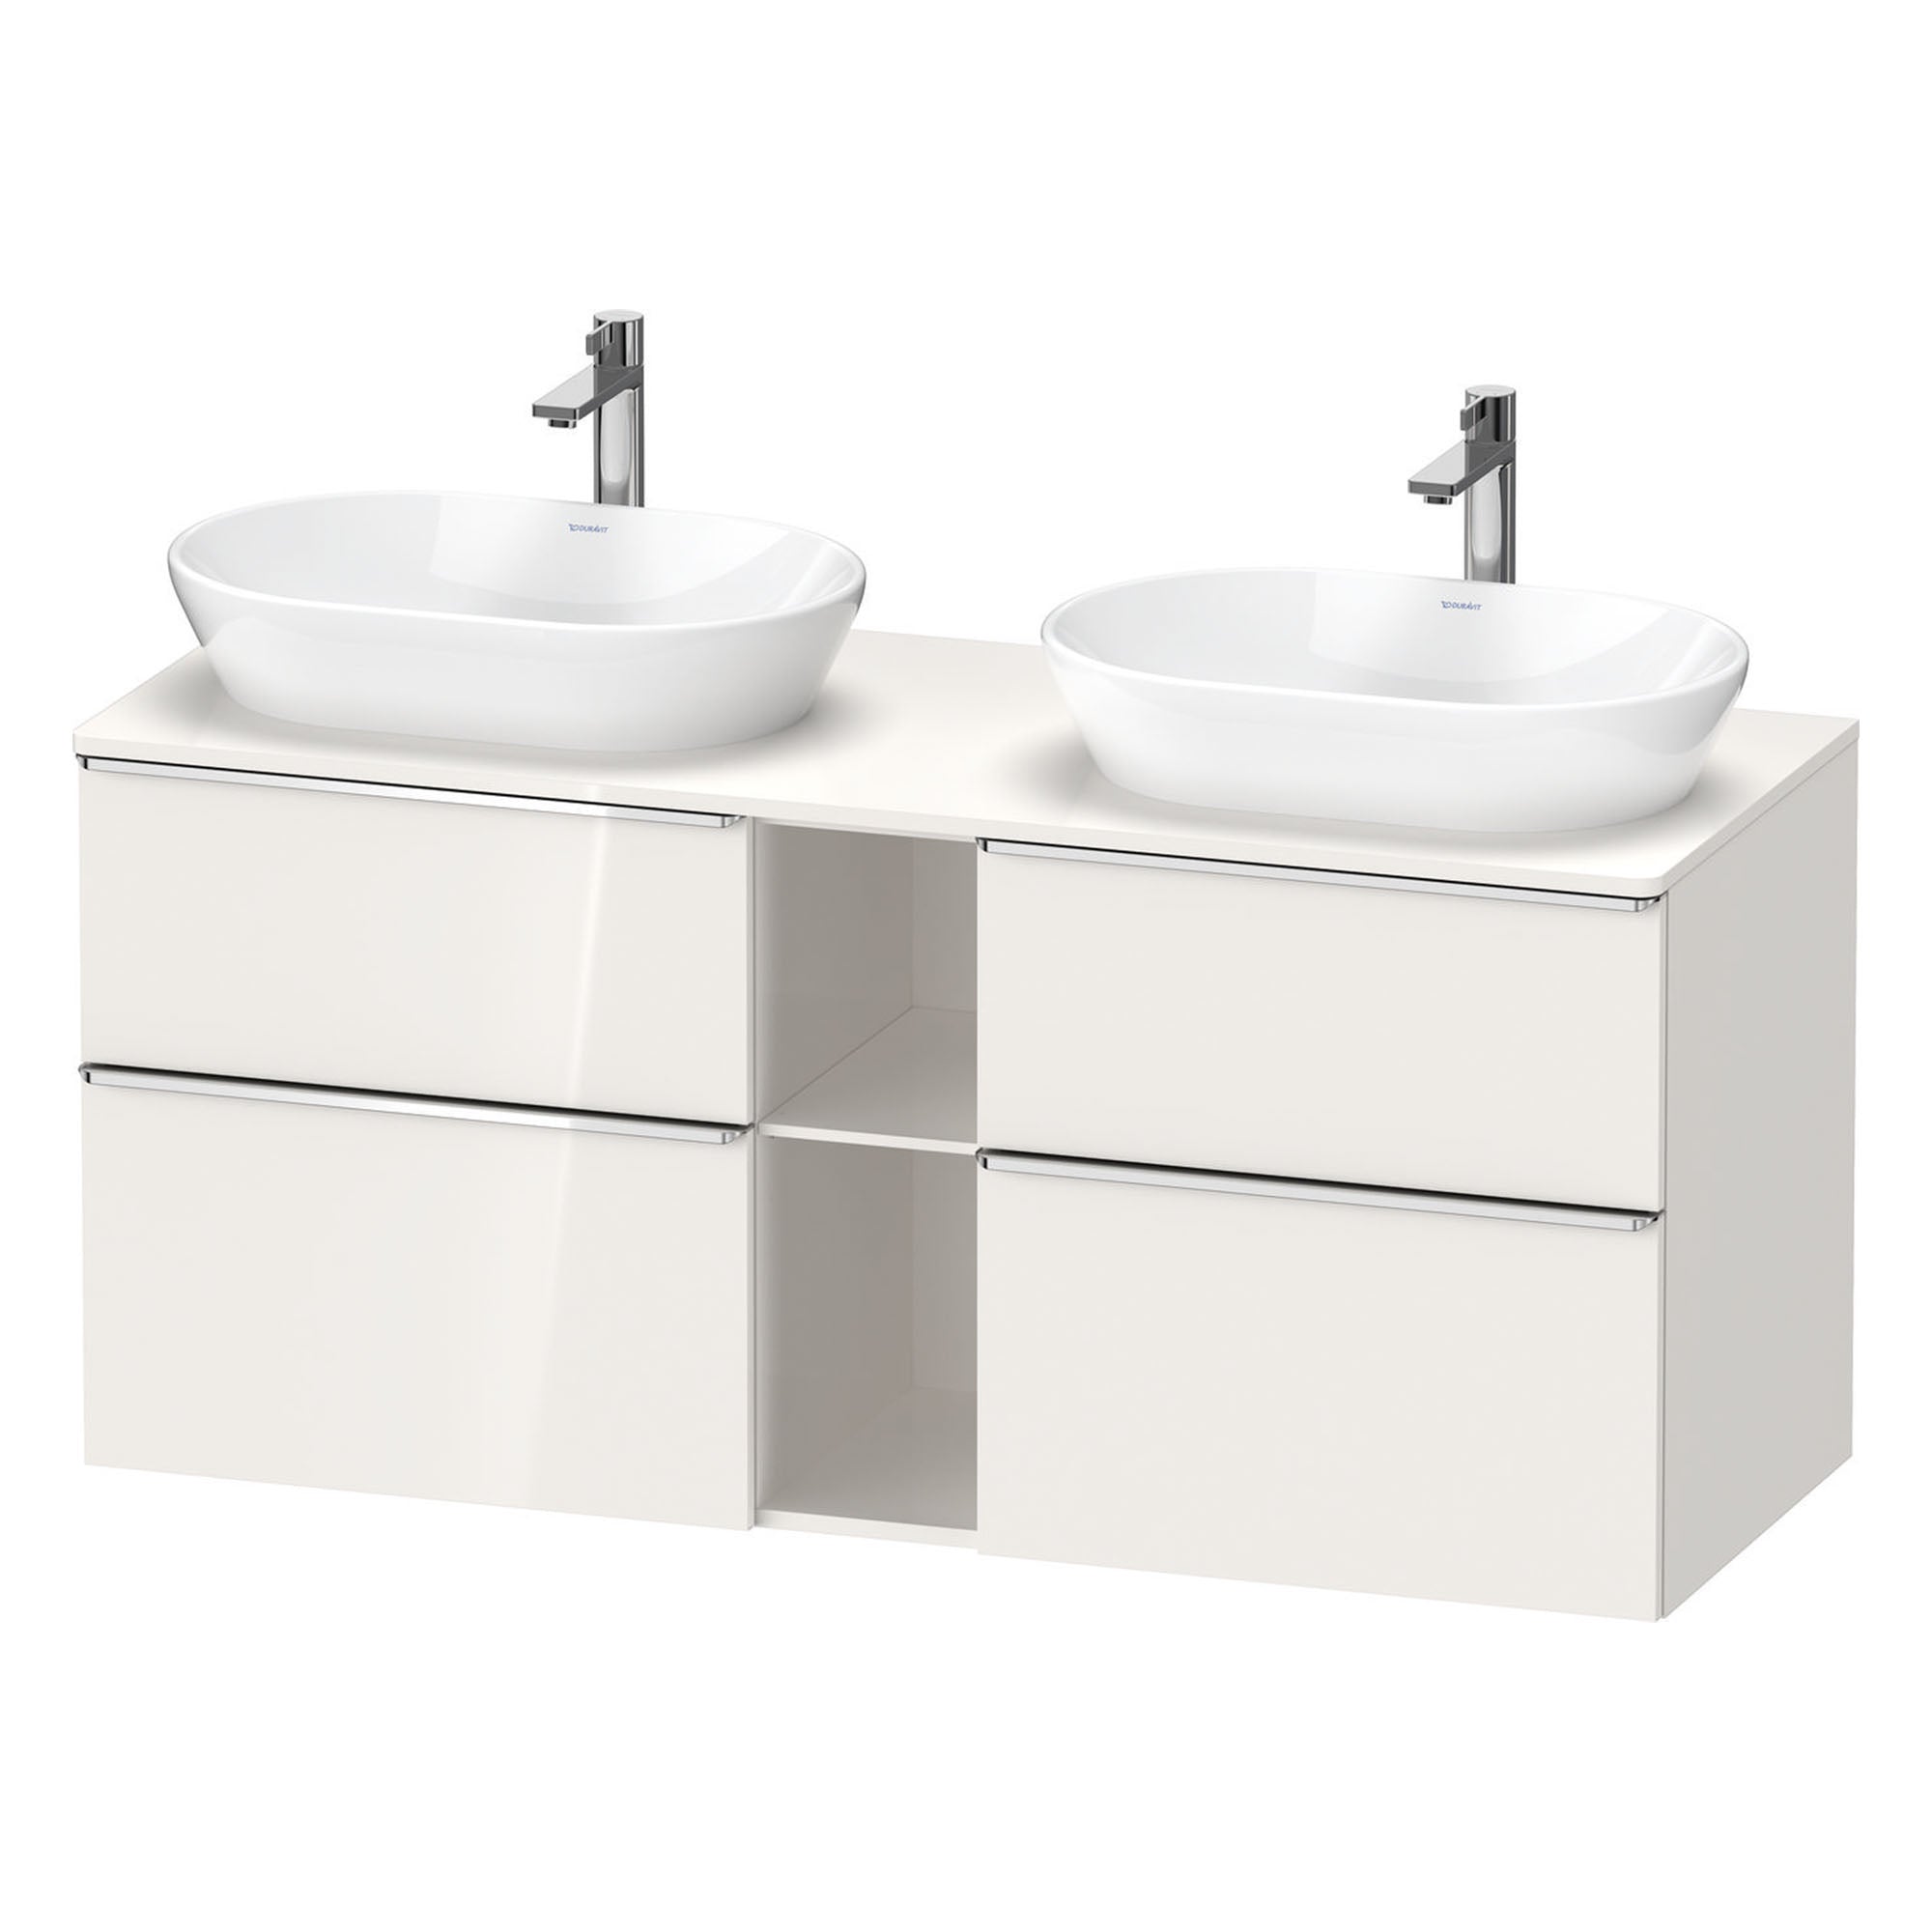 duravit d-neo 1400 wall mounted vanity unit with worktop 2 open shelves white gloss chrome handles